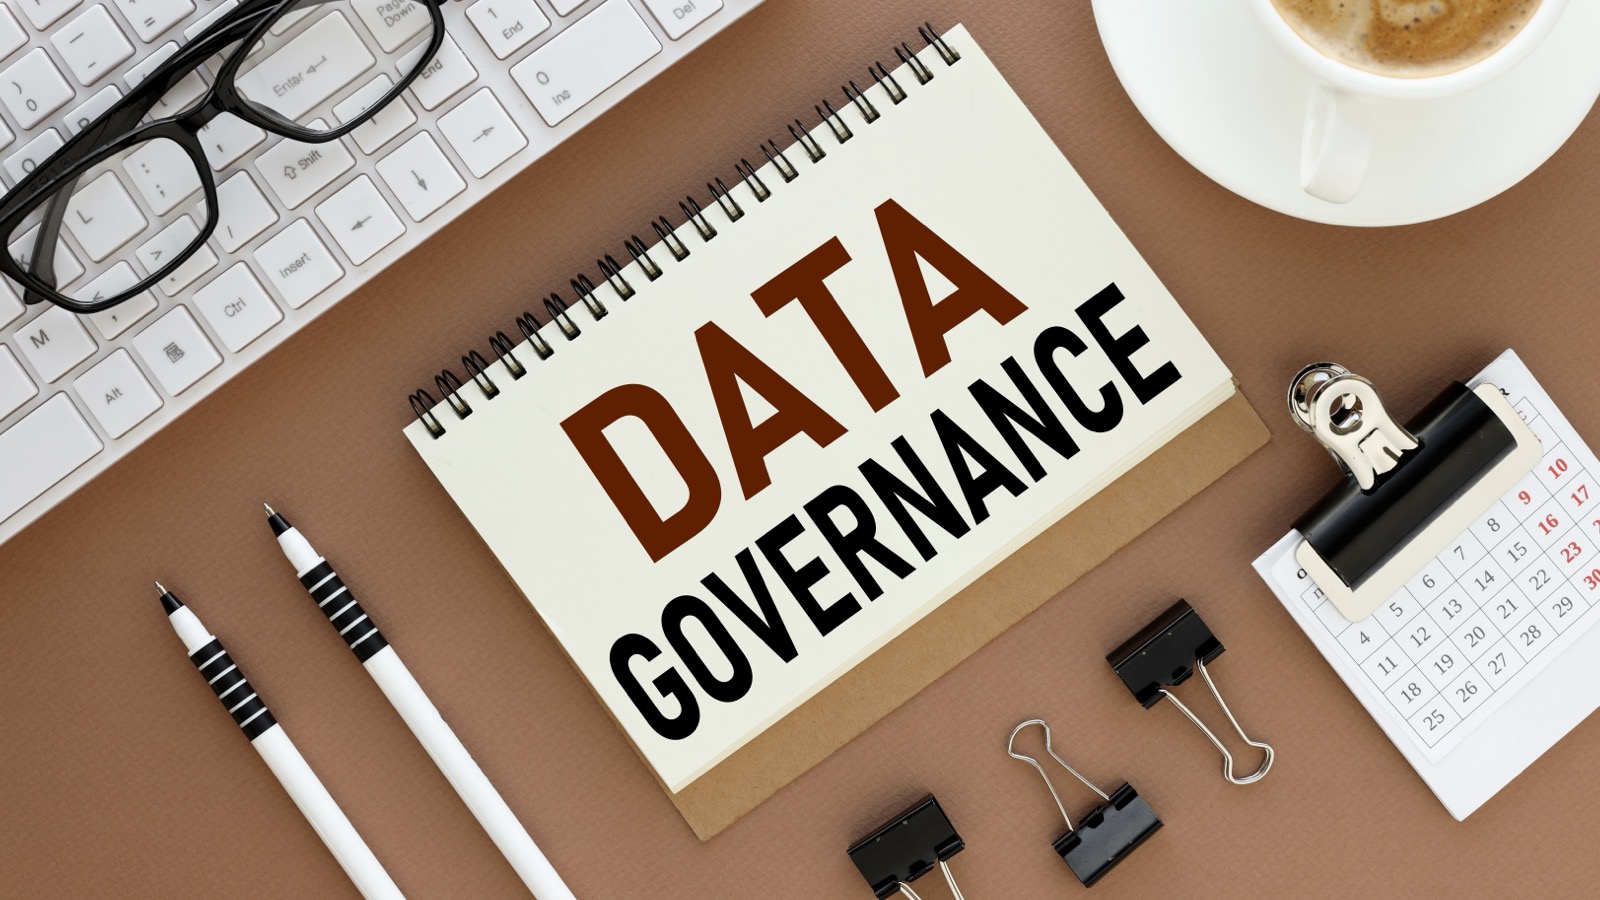 Desktop which has a notebook on it that says Data Governance.